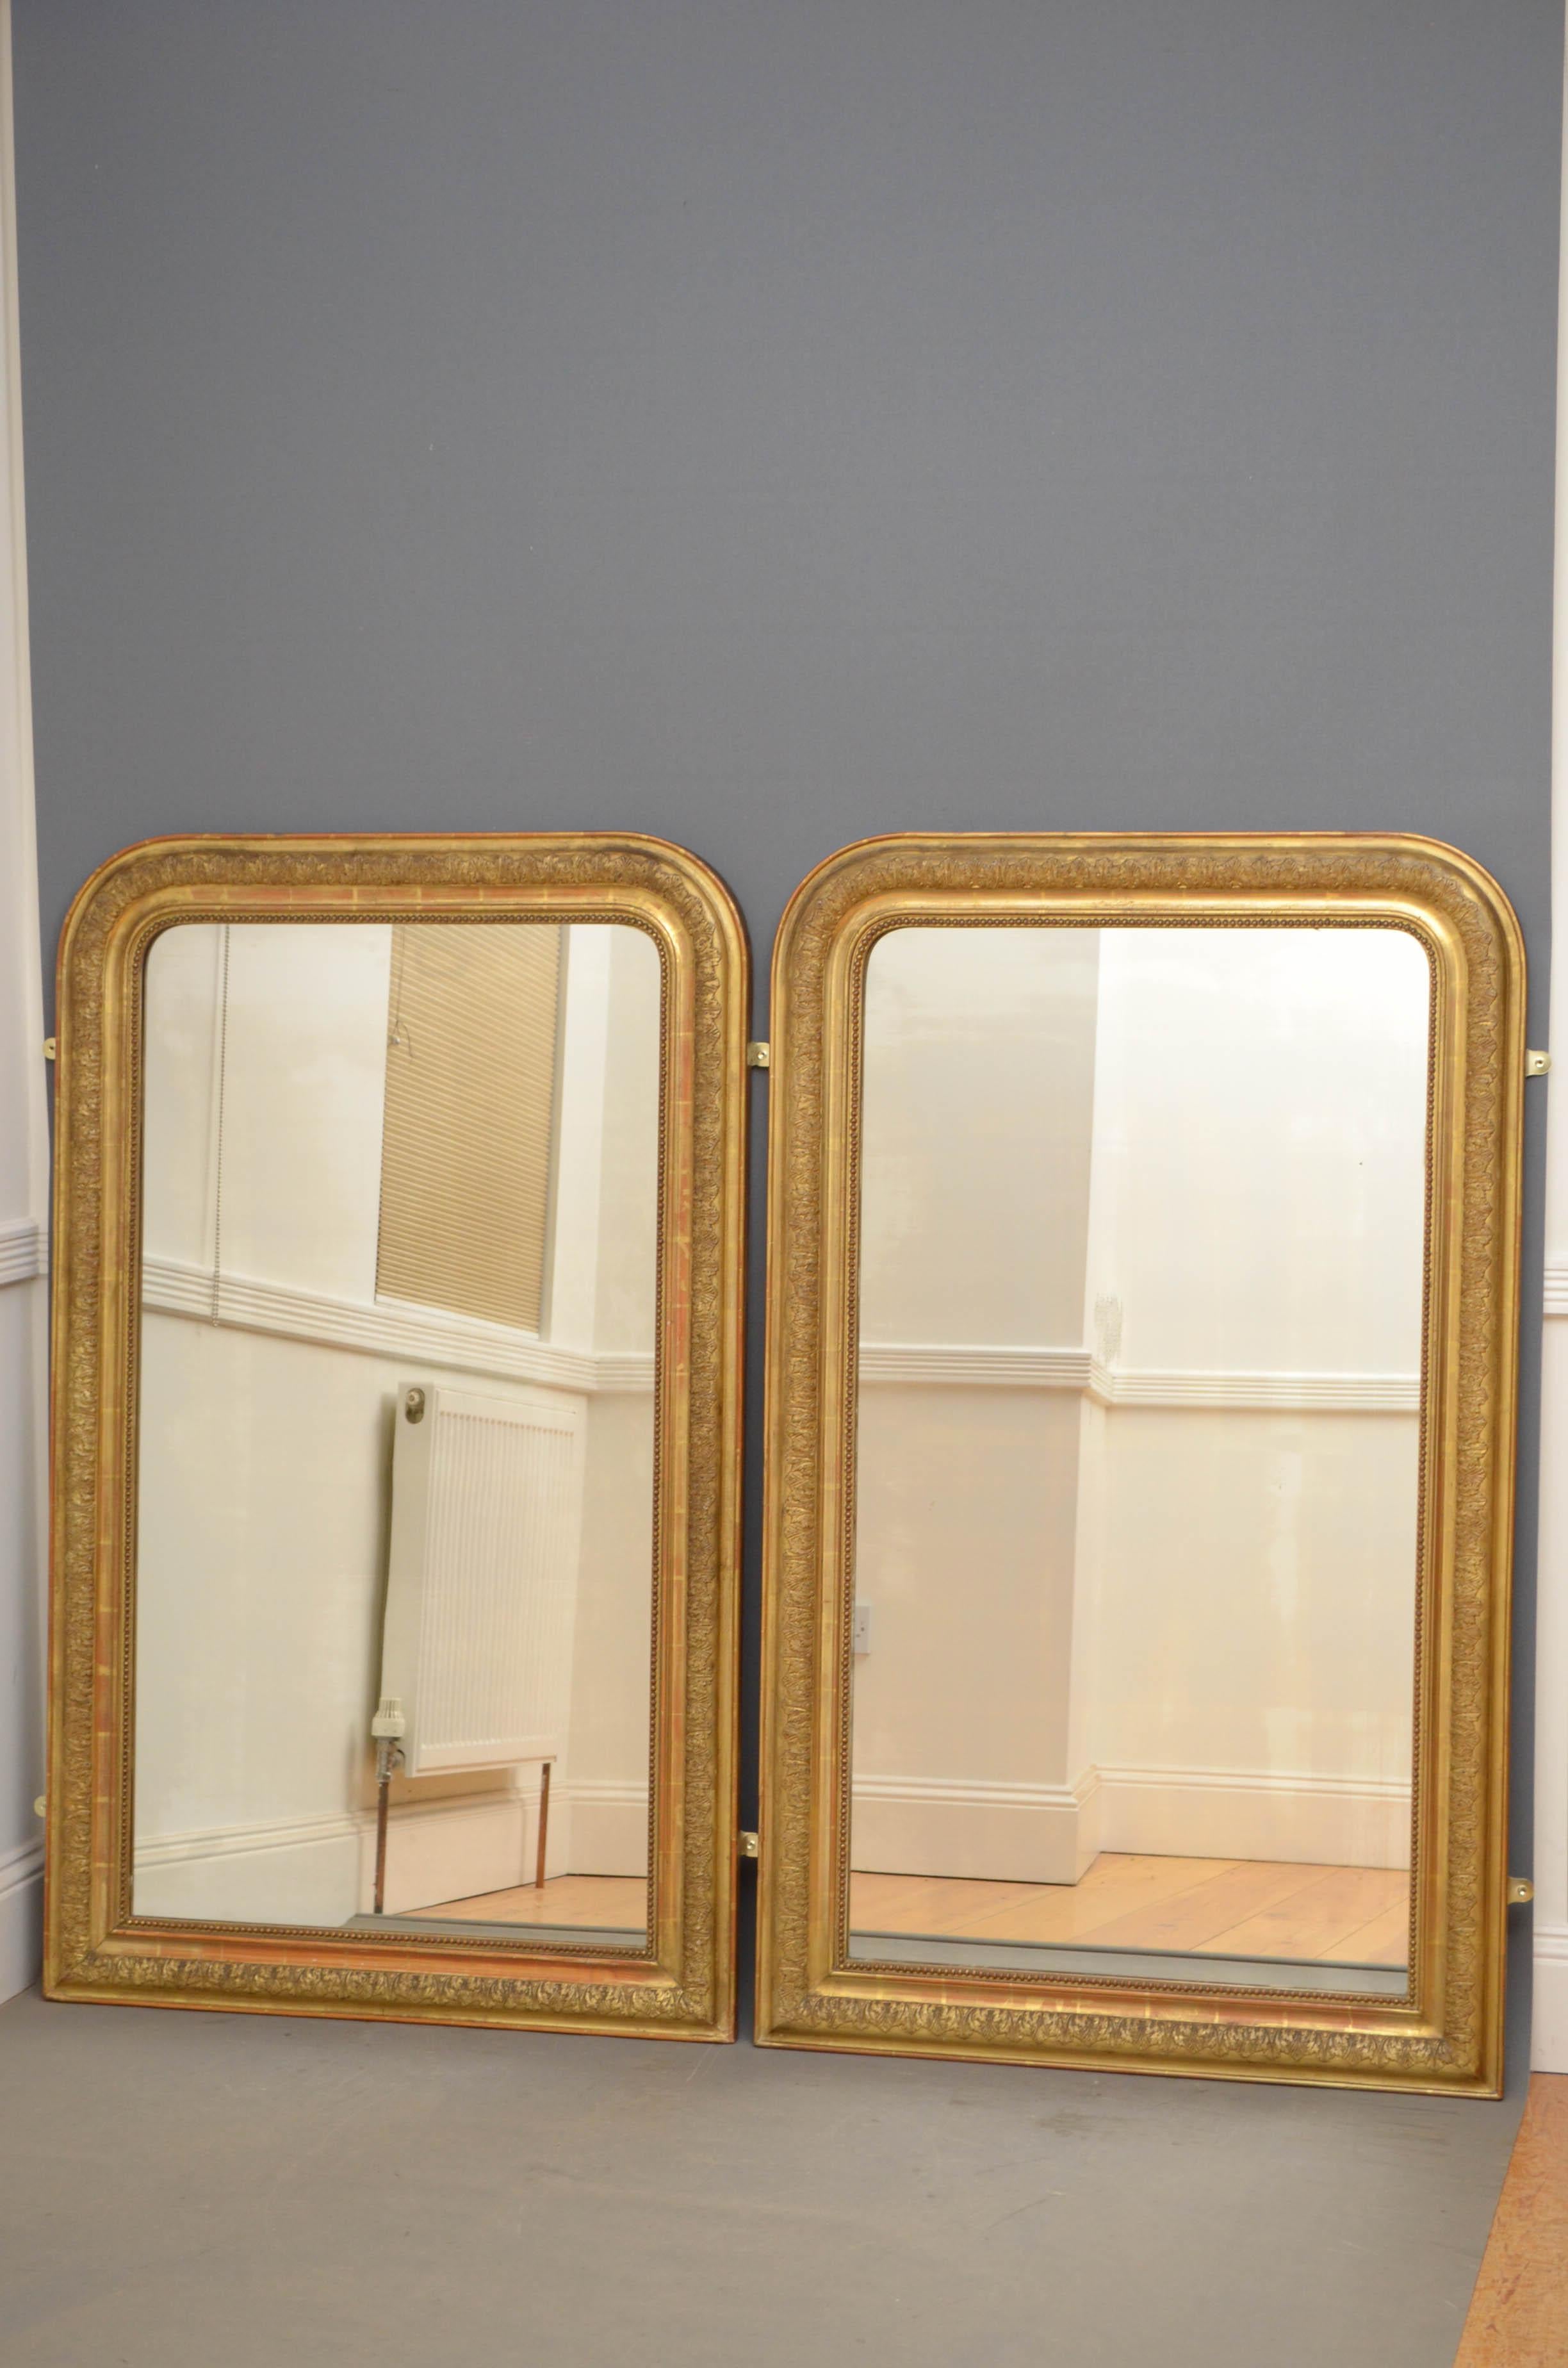 Sn4758 pair of French gilded wall mirrors, each having original glass with some foxing in moulded and carved giltwood frame. This pair of mirrors retain original glass, gilt and backboards all in fantastic home ready condition, circa